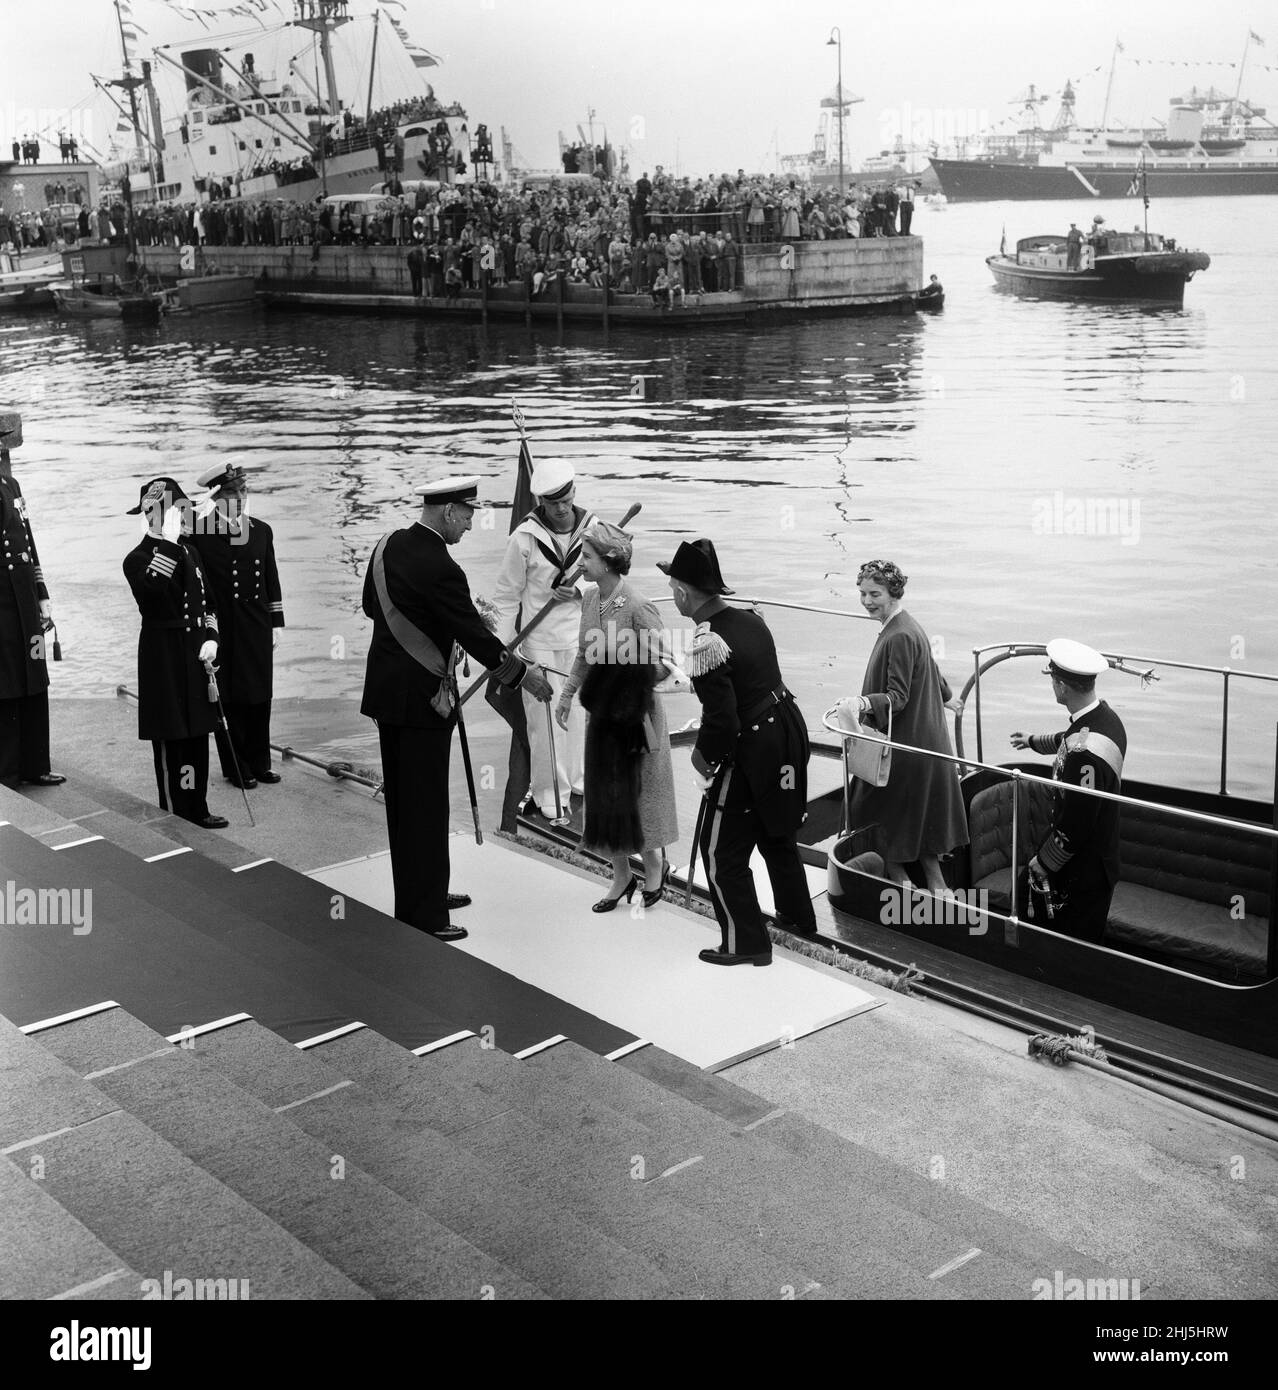 Queen Elizabeth II and Prince Philip, Duke of Edinburgh visit to Denmark. They were hosted by King Frederik IX and Queen Ingrid of Denmark. 21st May 1957. Stock Photo